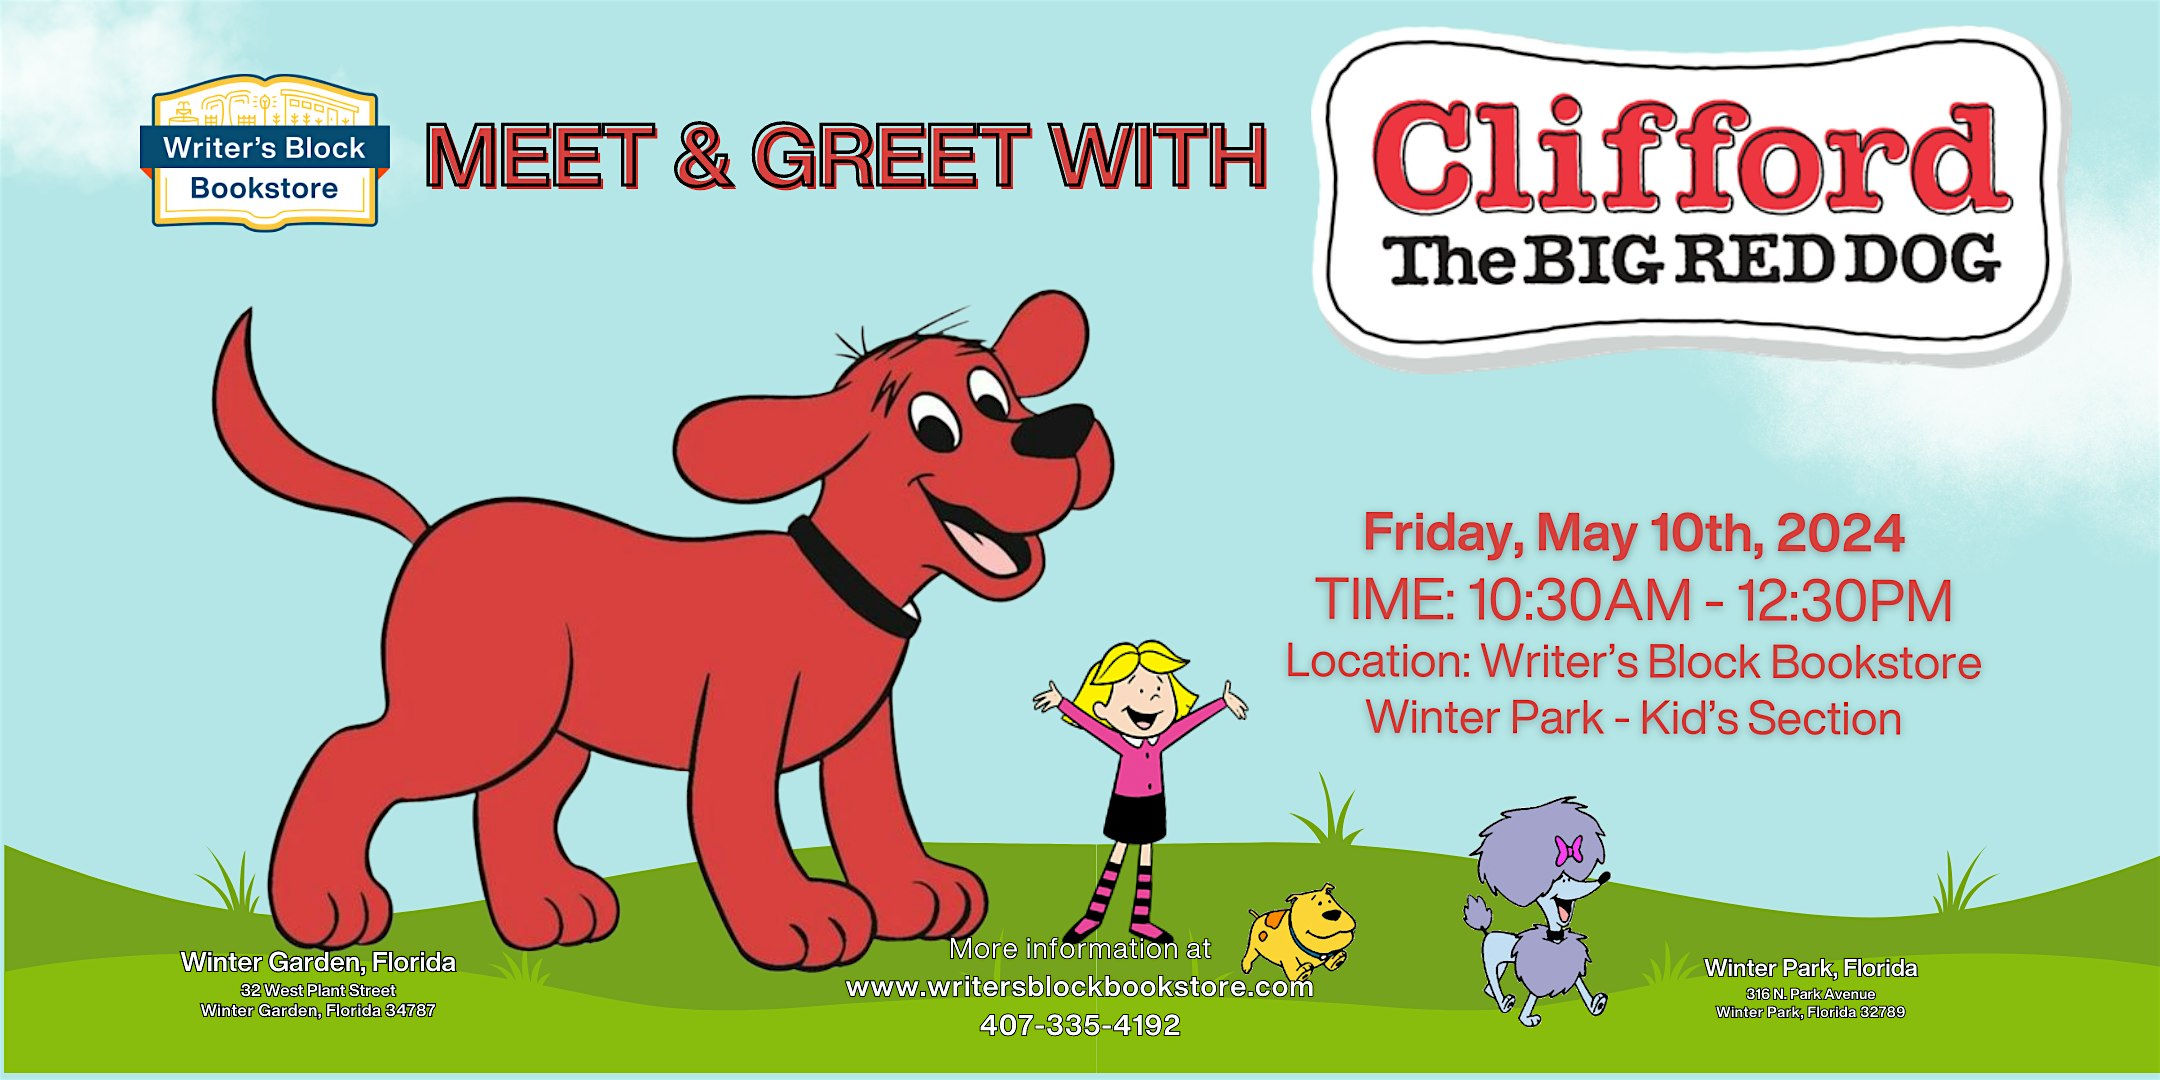 Come meet Clifford The Big Red Dog!